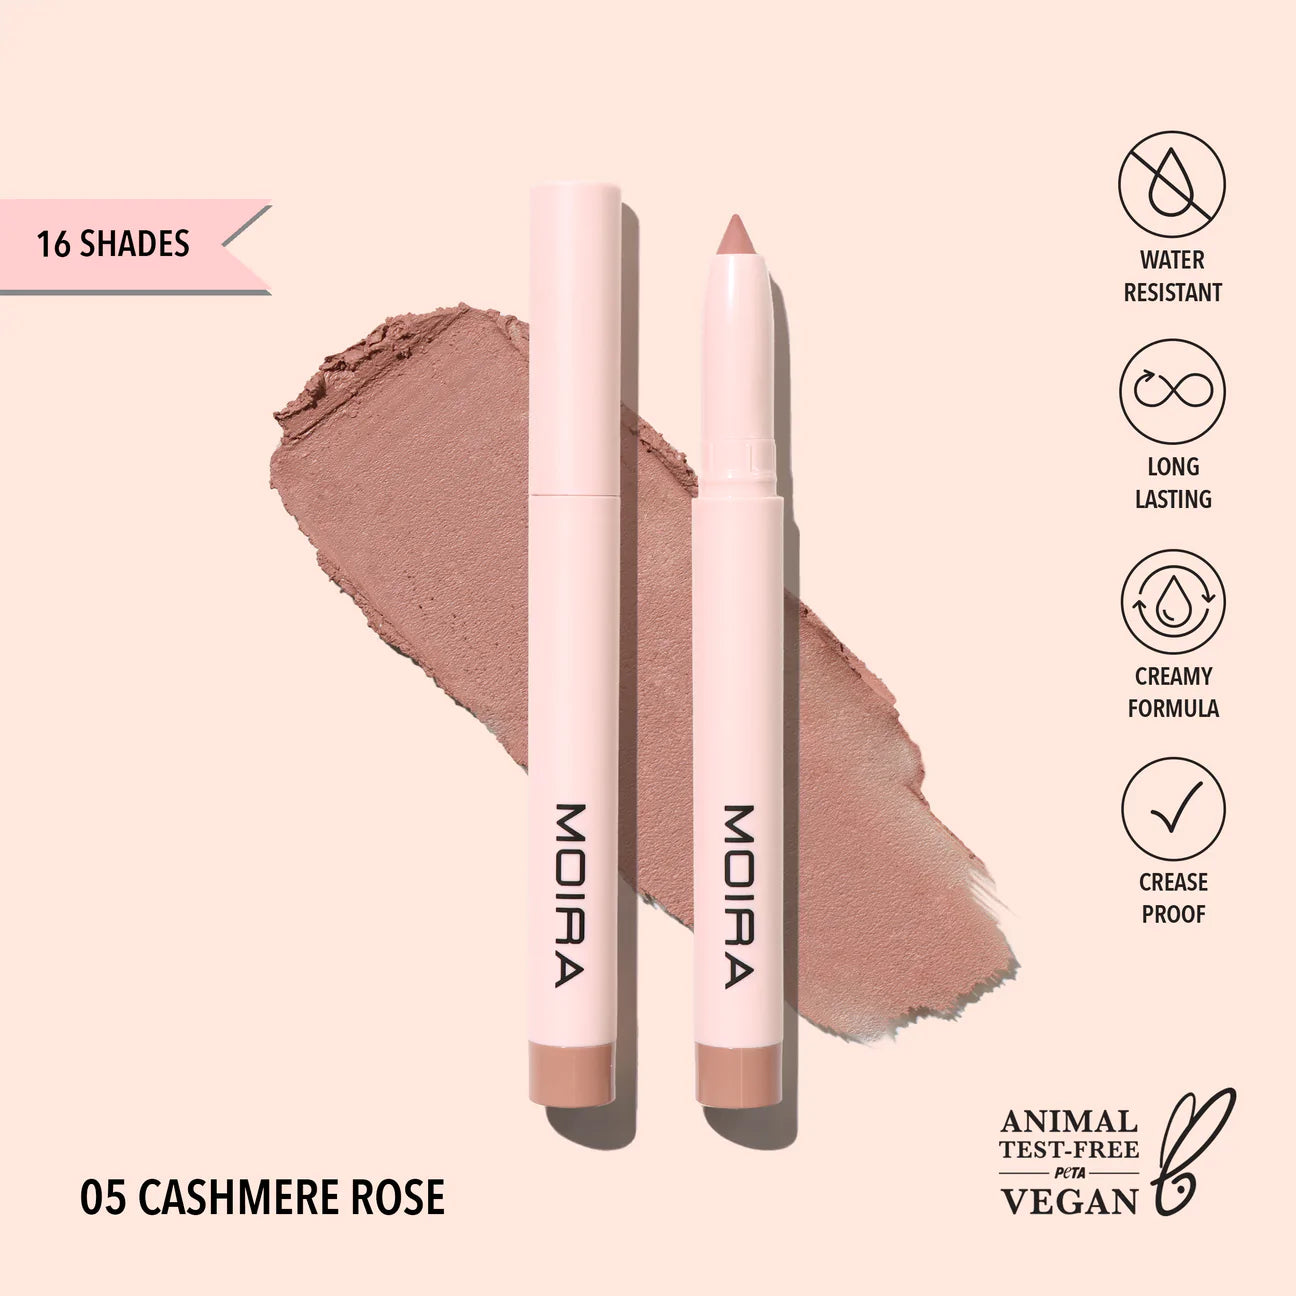 80 At Glance Stick Shadow - 005 Cashmere Rose